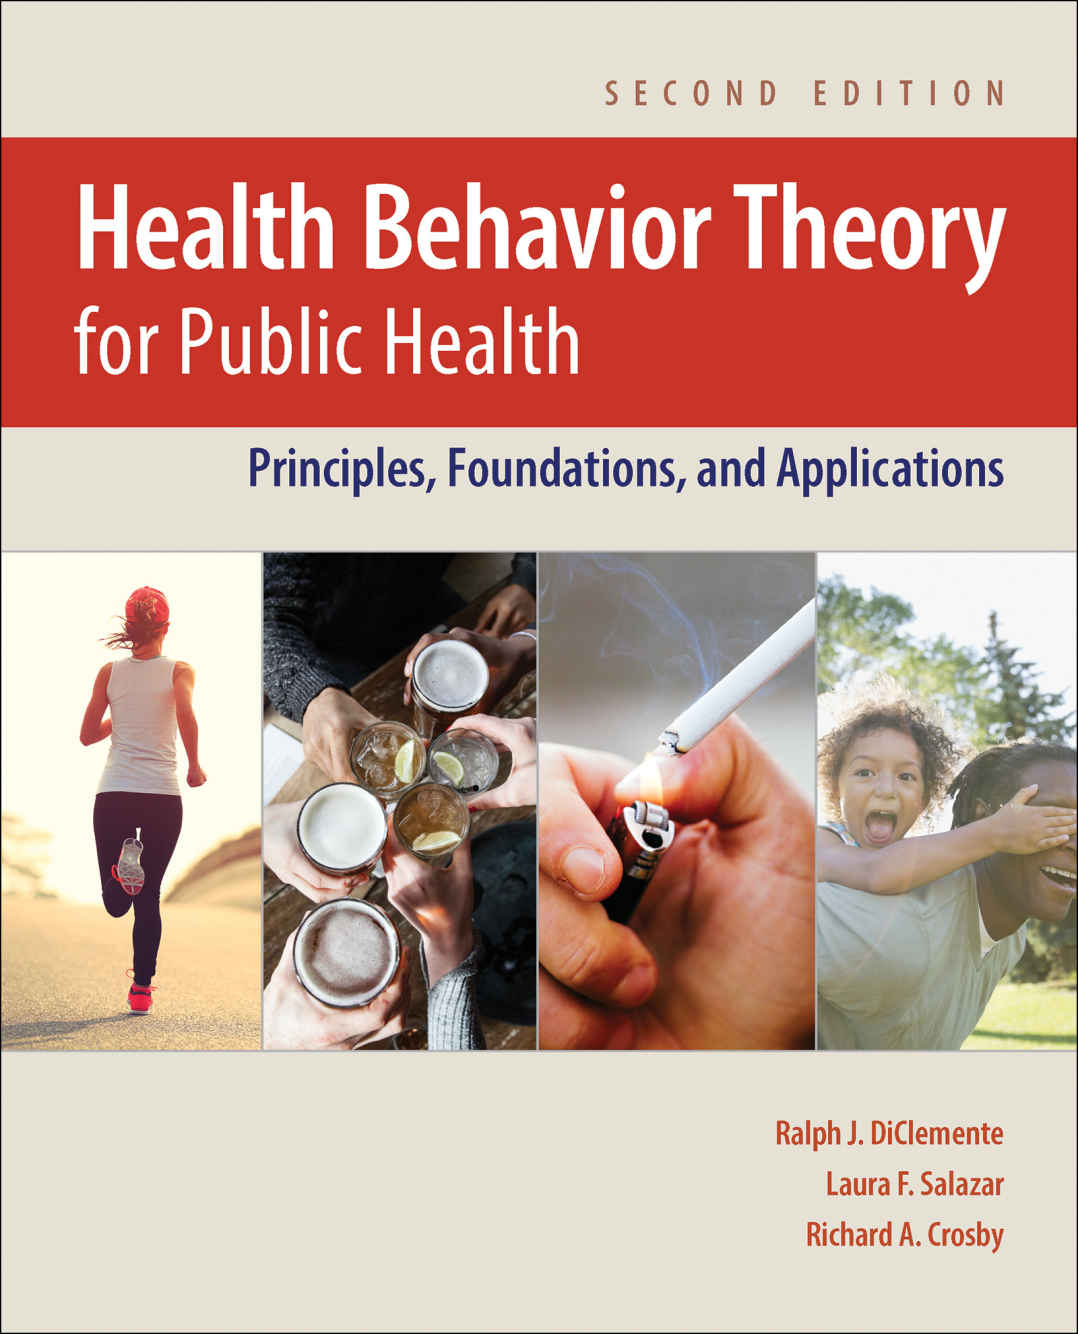 research about health behaviors